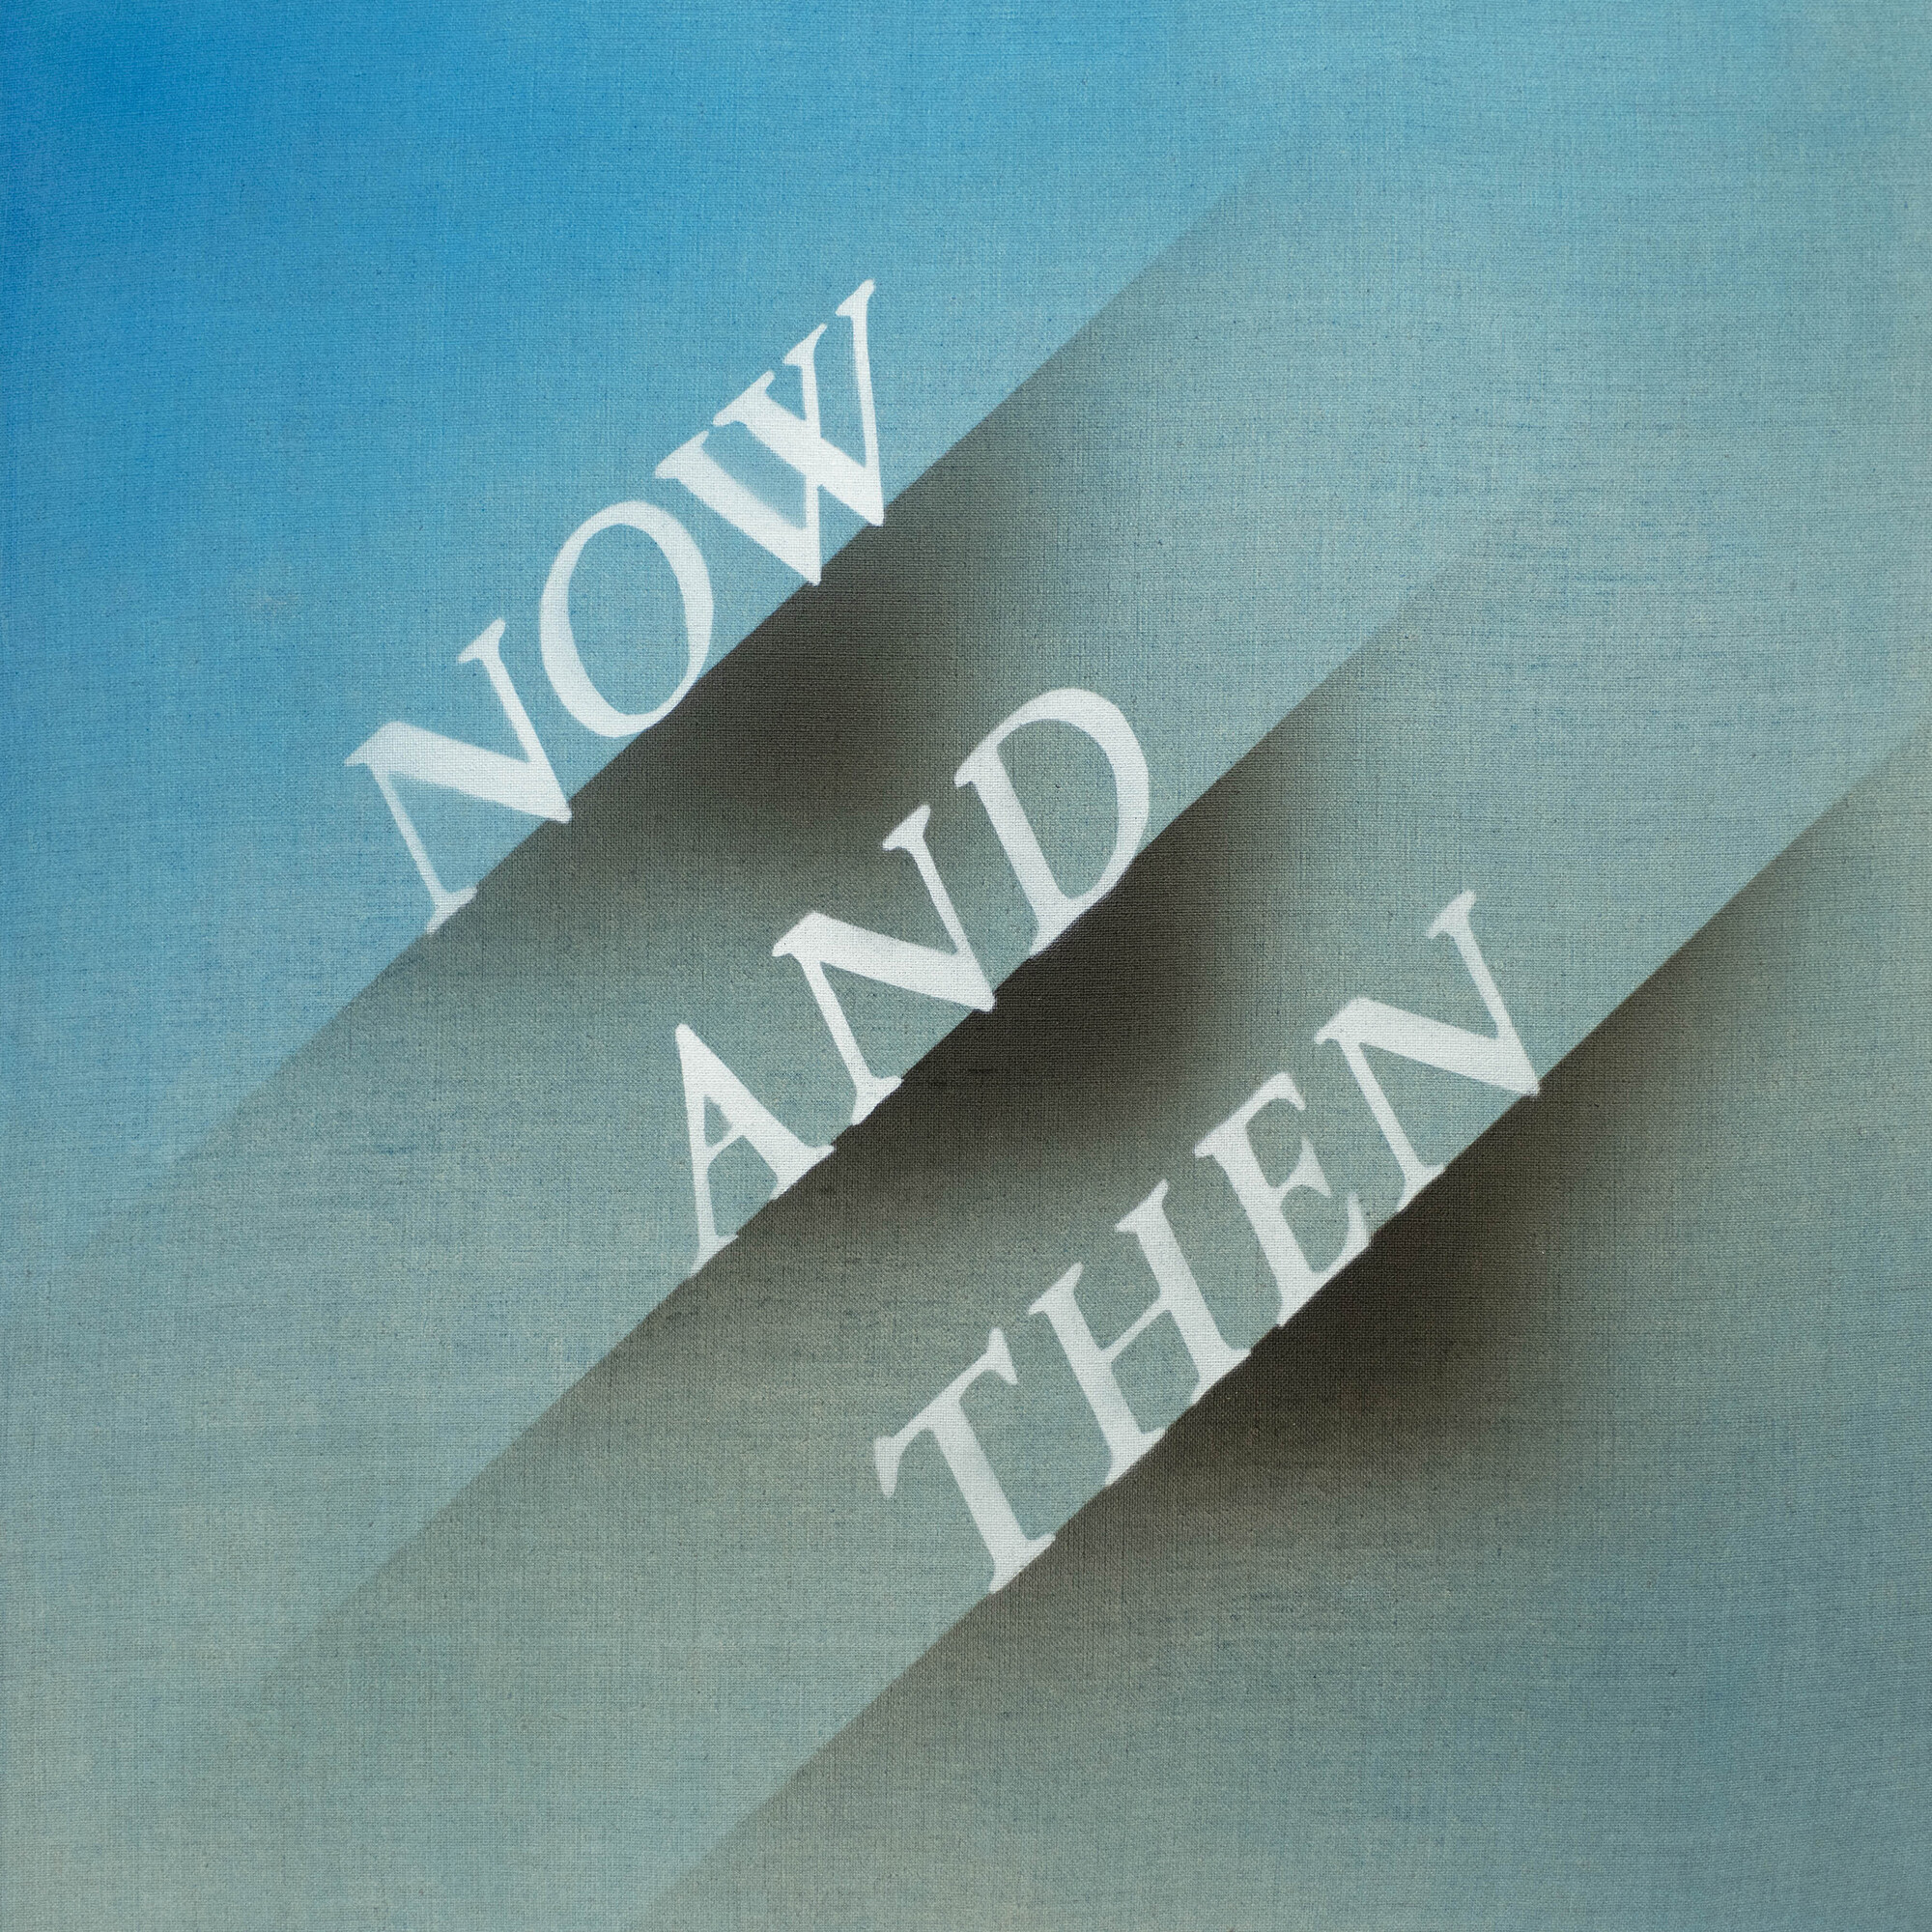 Now And Then cover art